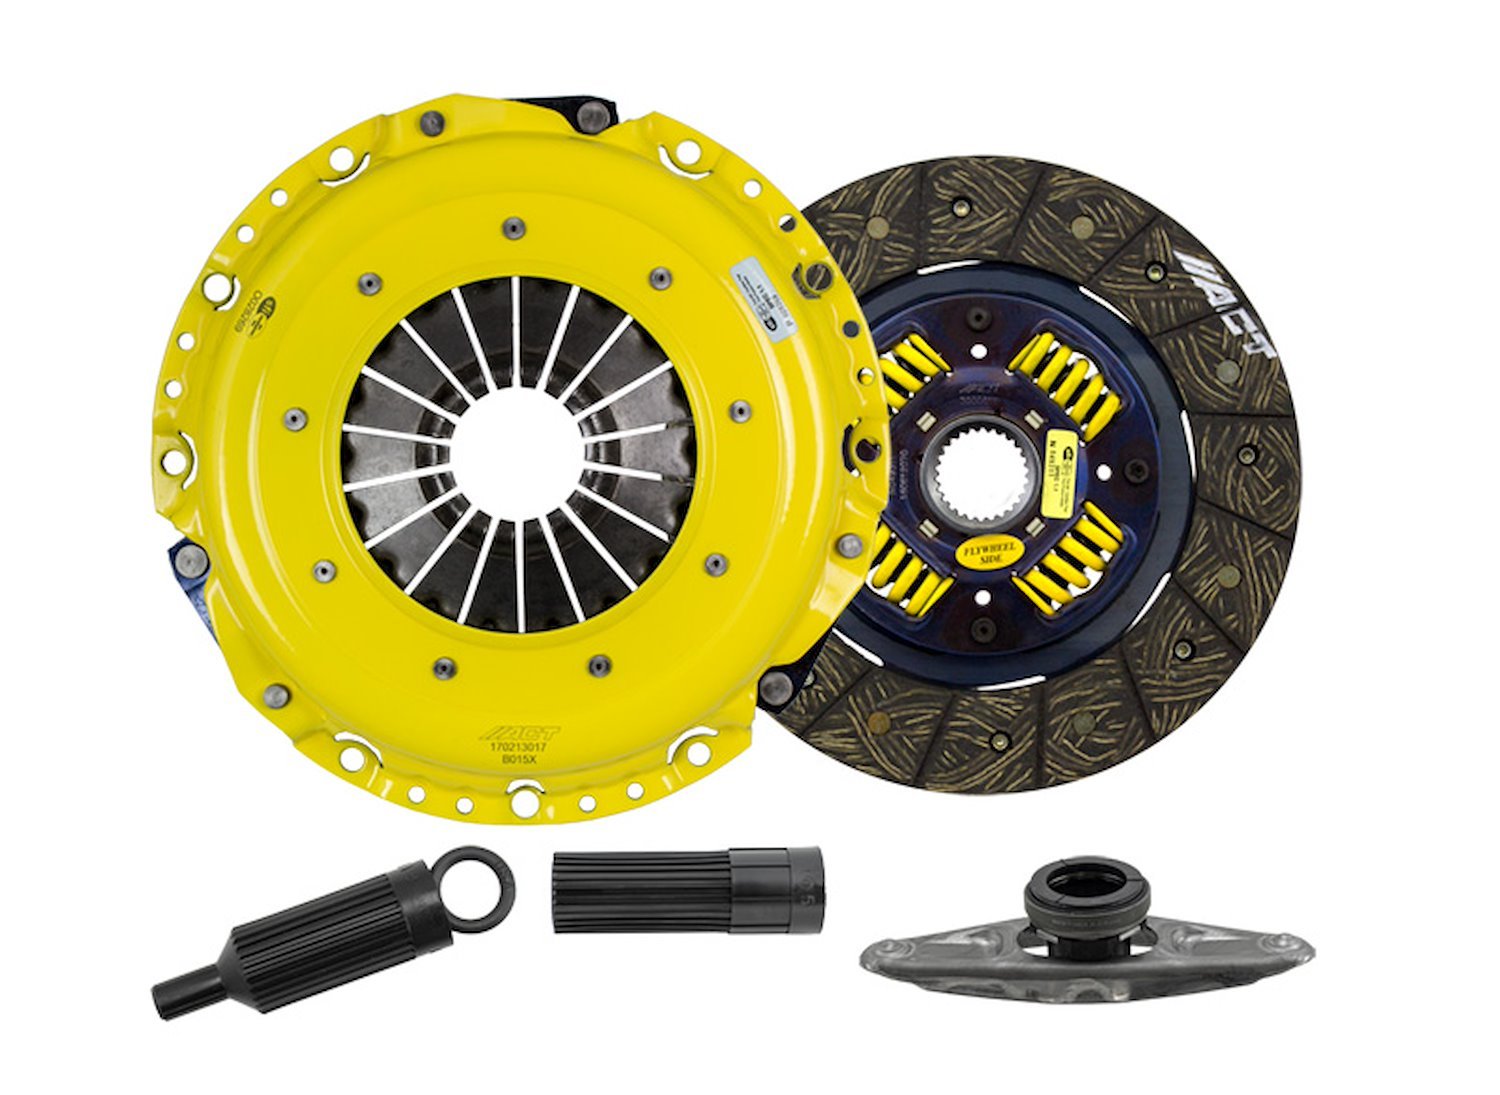 ACT XT/Performance Street Sprung Clutch Transmission Clutch Kit Fits Select BMW